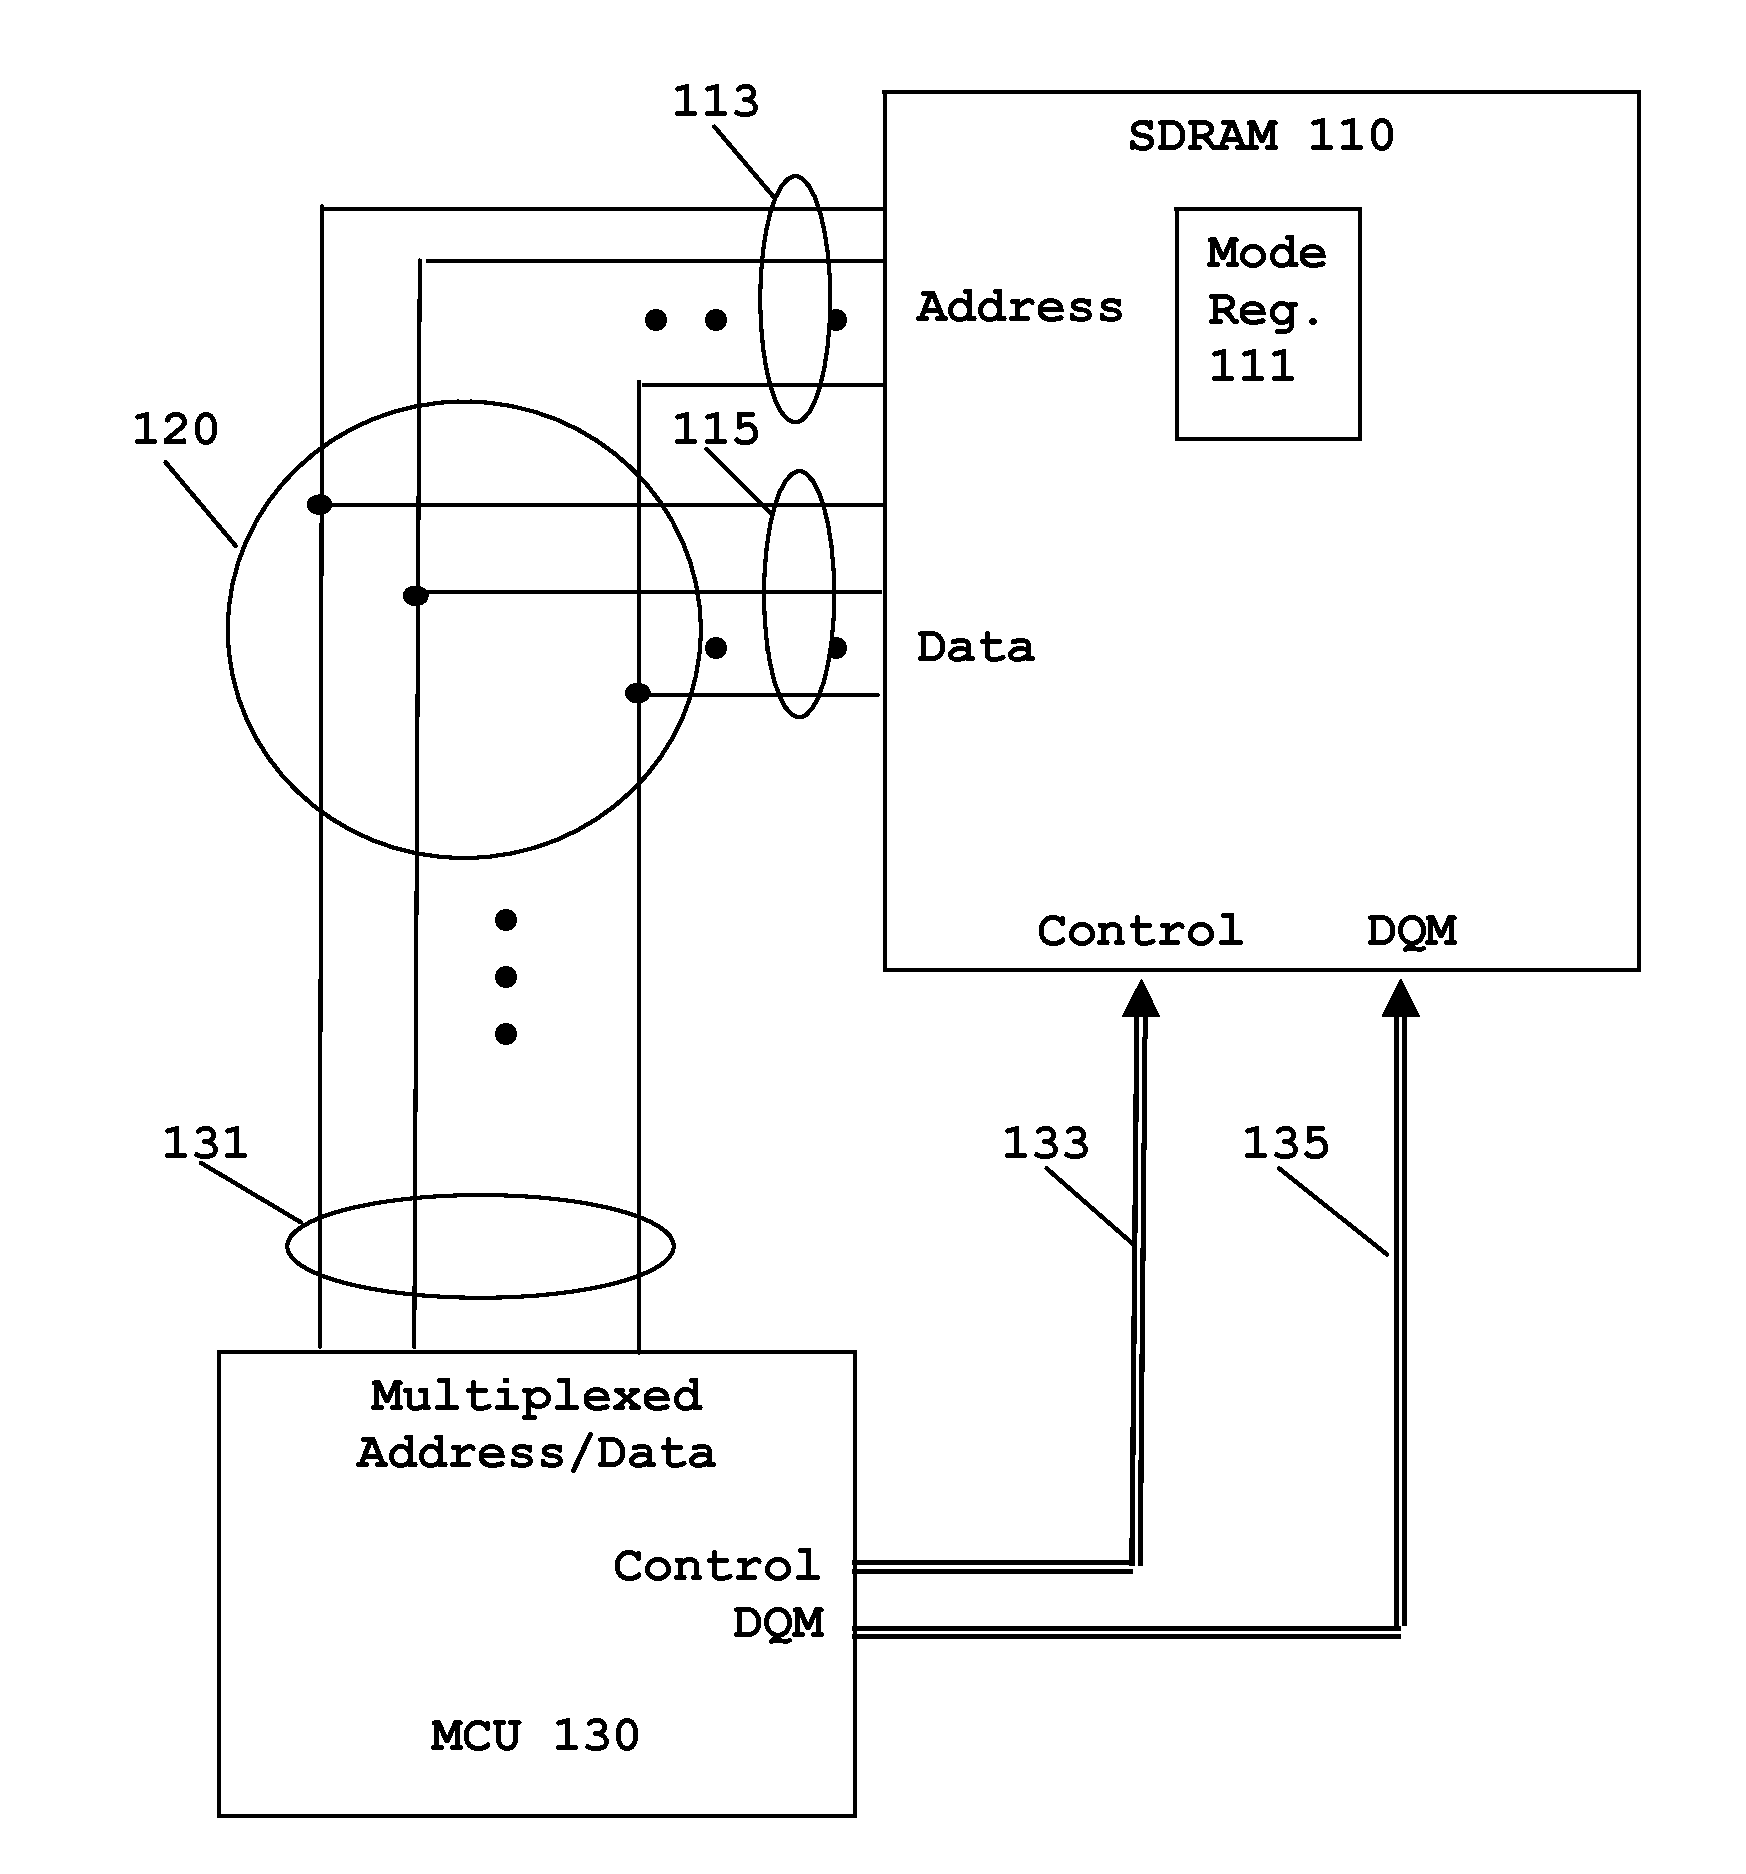 Method Allowing Processor with Fewer Pins to Use SDRAM